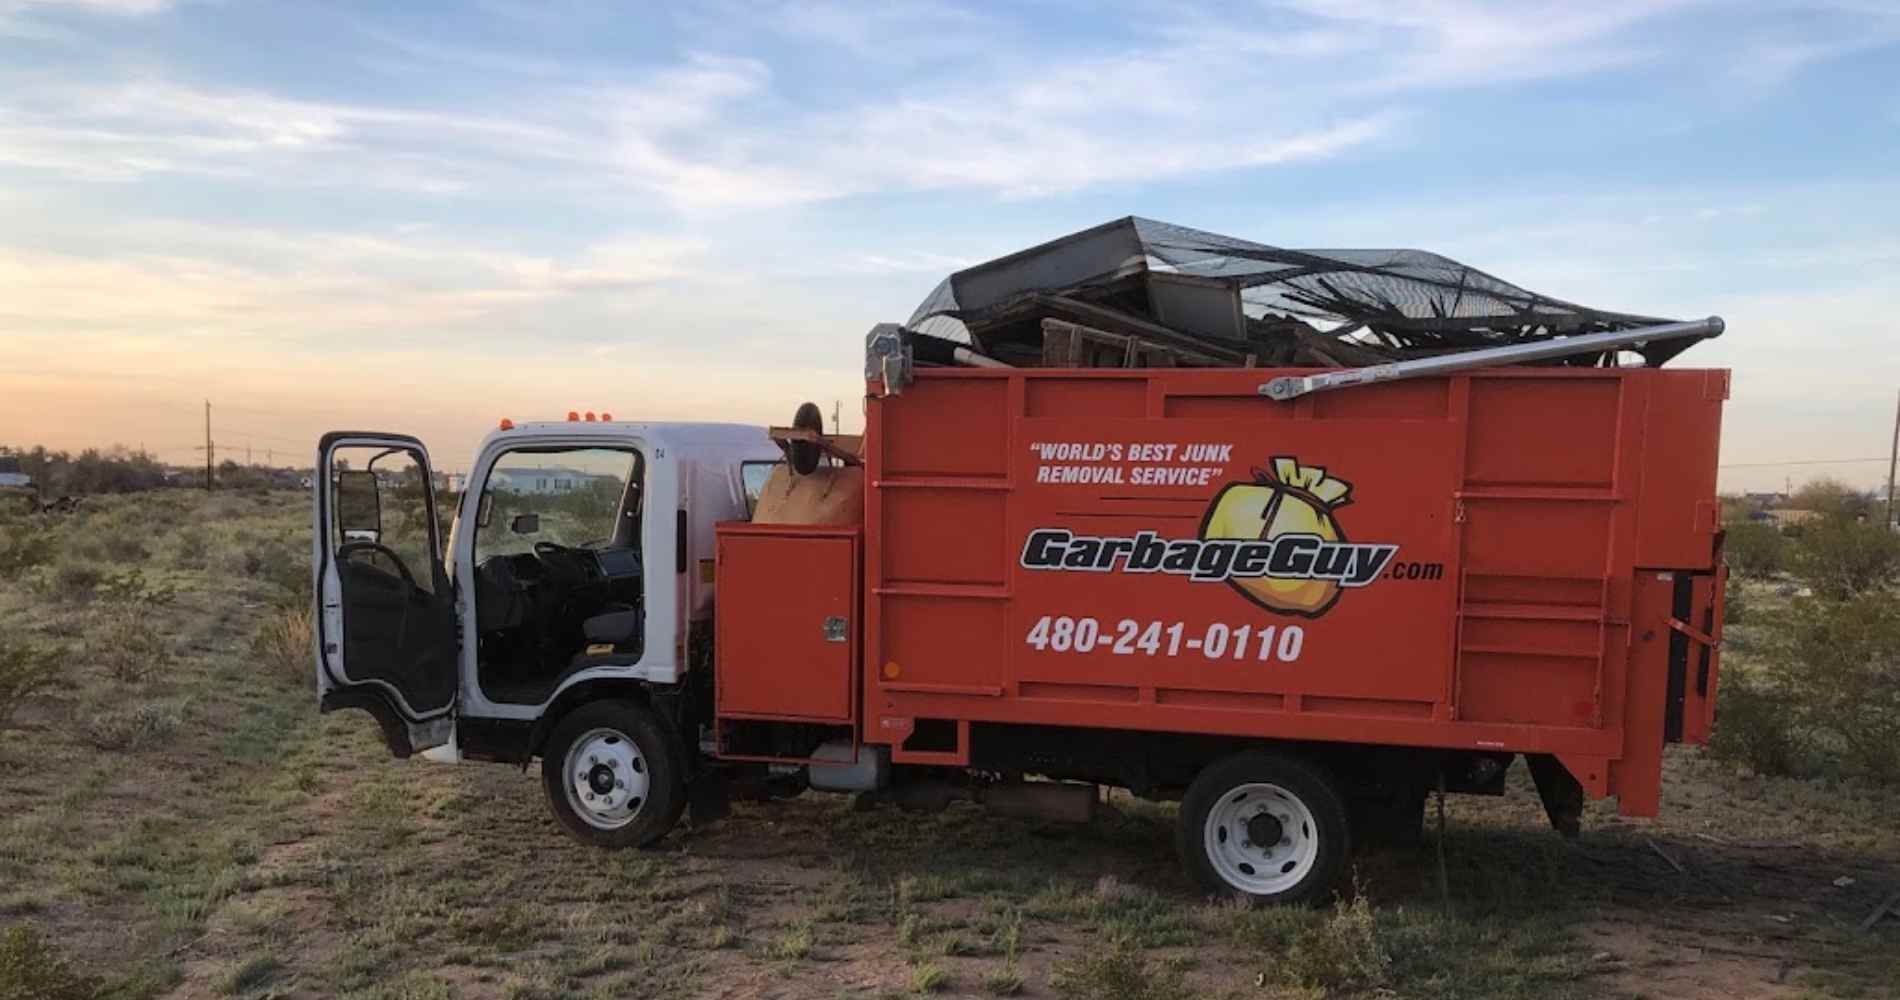 #1 for Junk Removal in Youngtown, AZ with Over 1200 5-Star Reviews!